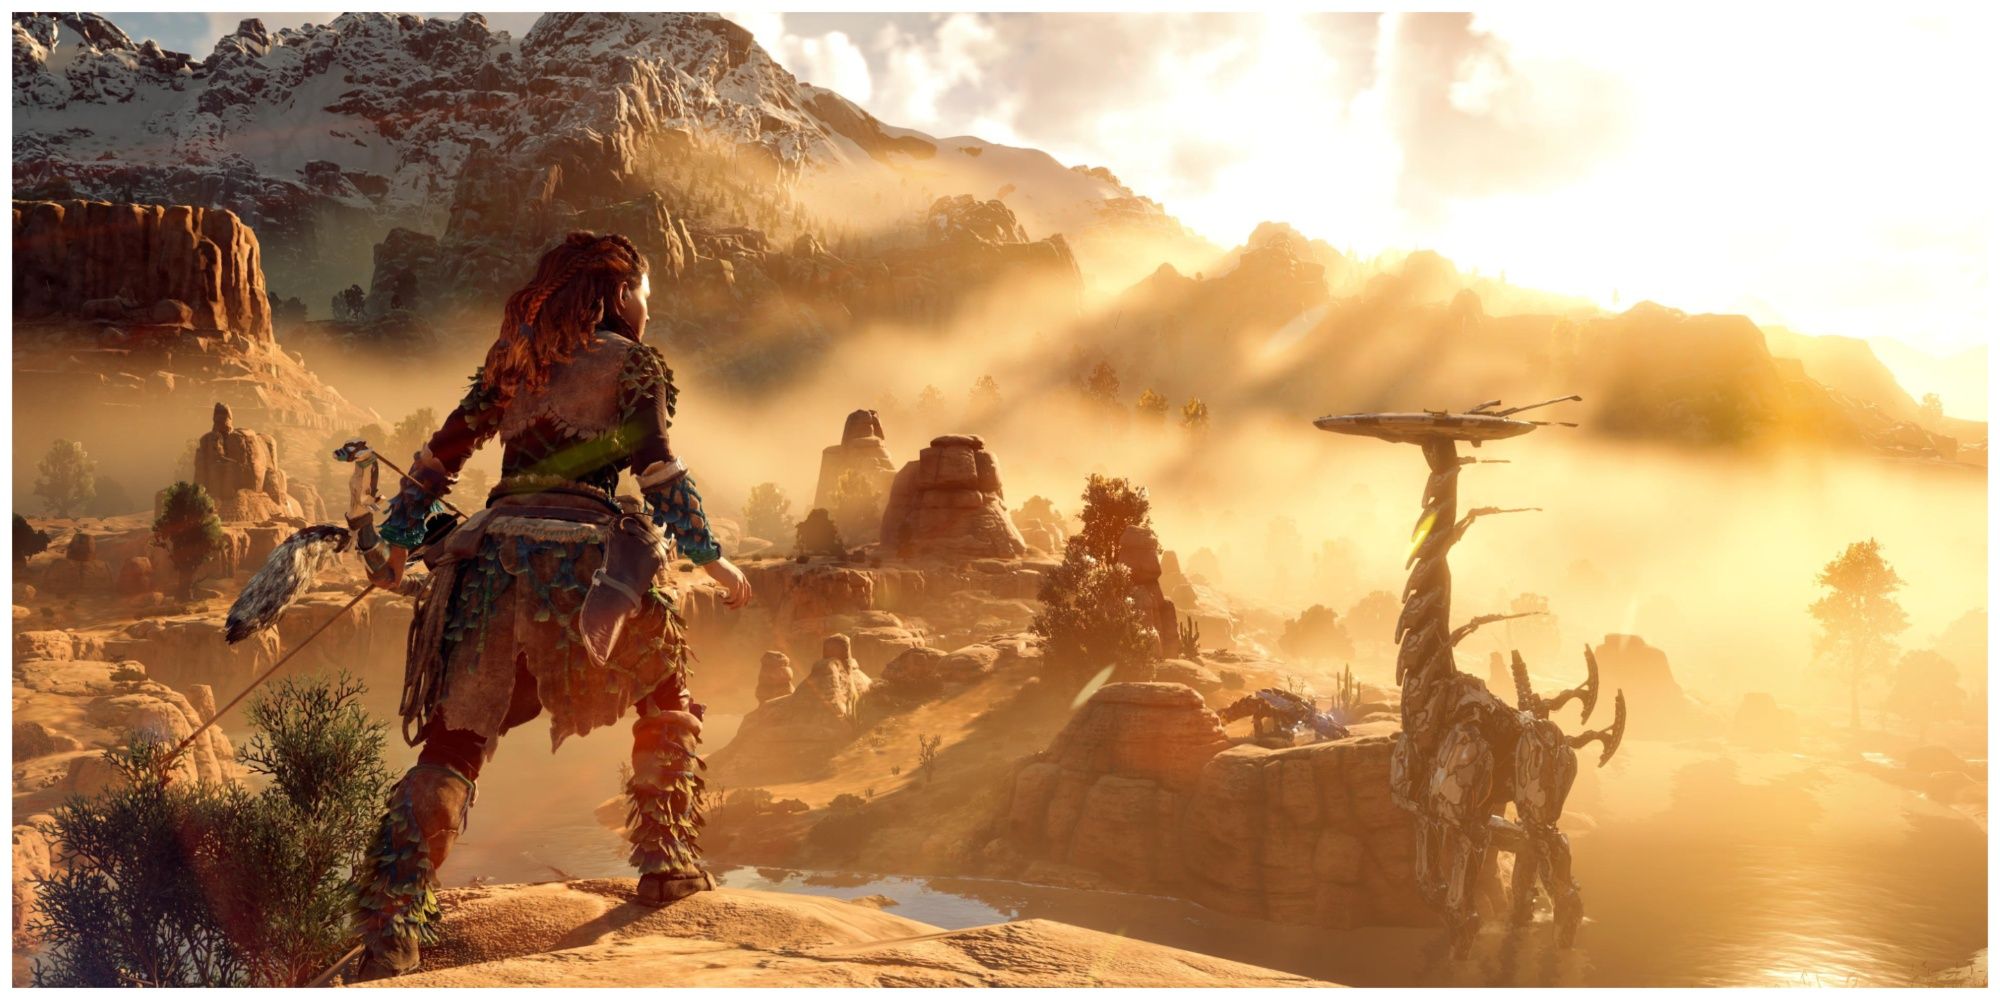 Horizon zero dawn main character looking at monster from a cliff at sunset